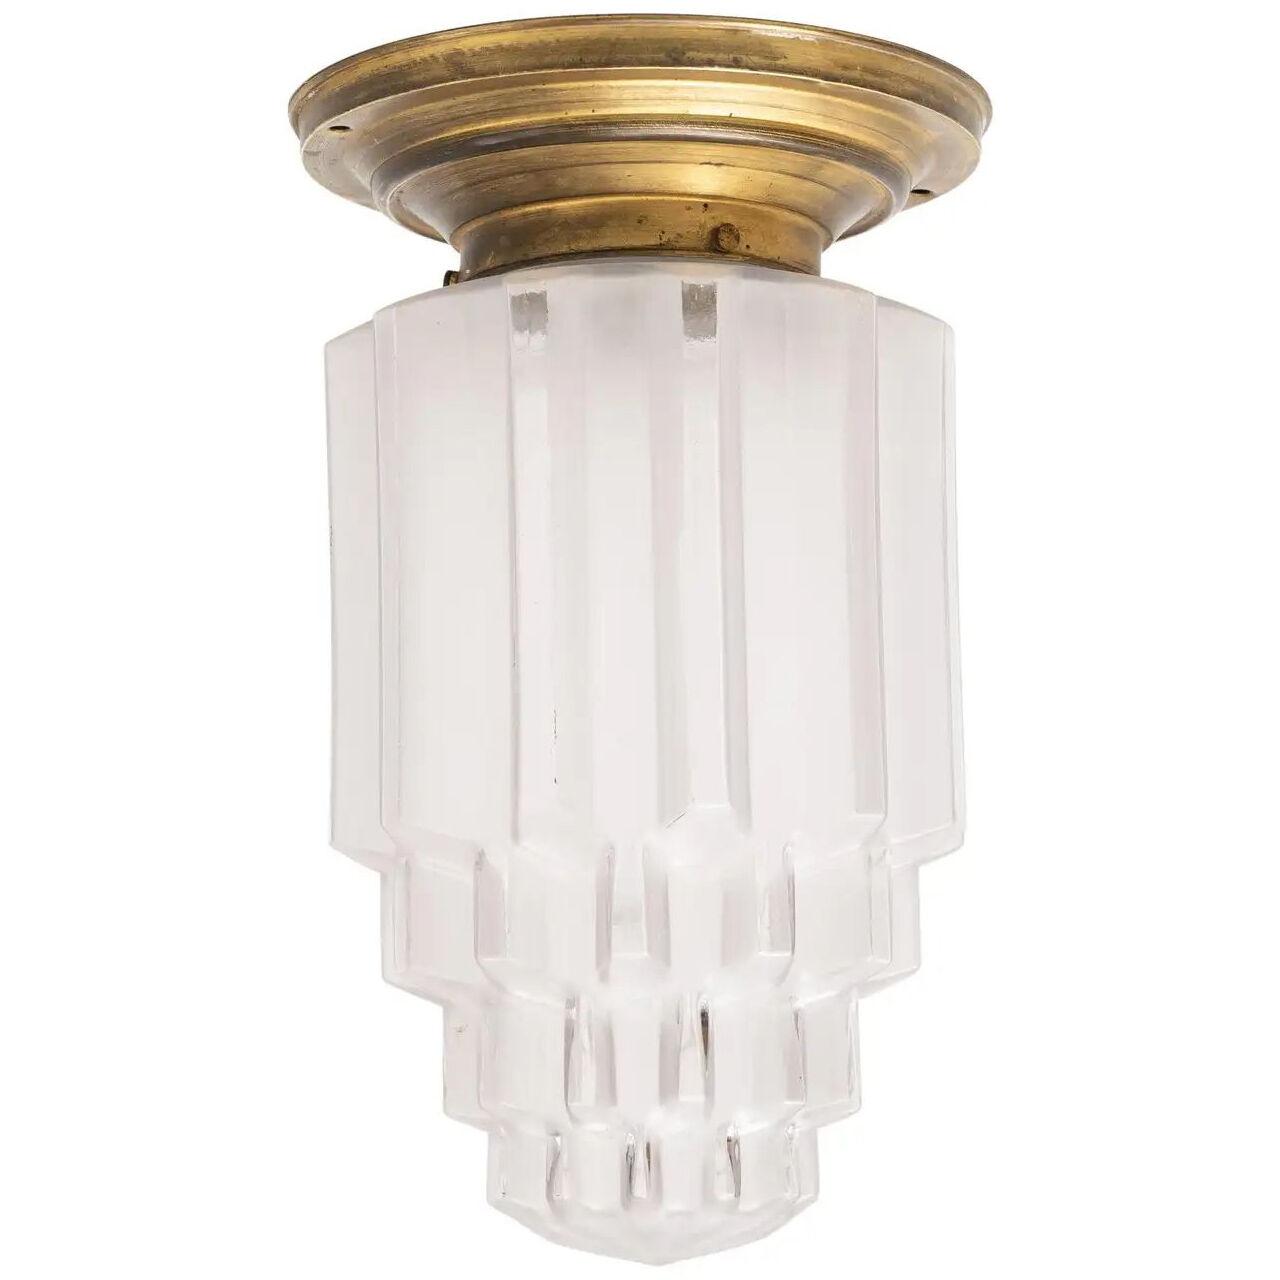 Vintage Art Deco Brass and Glass Ceiling Lamp, circa 1940